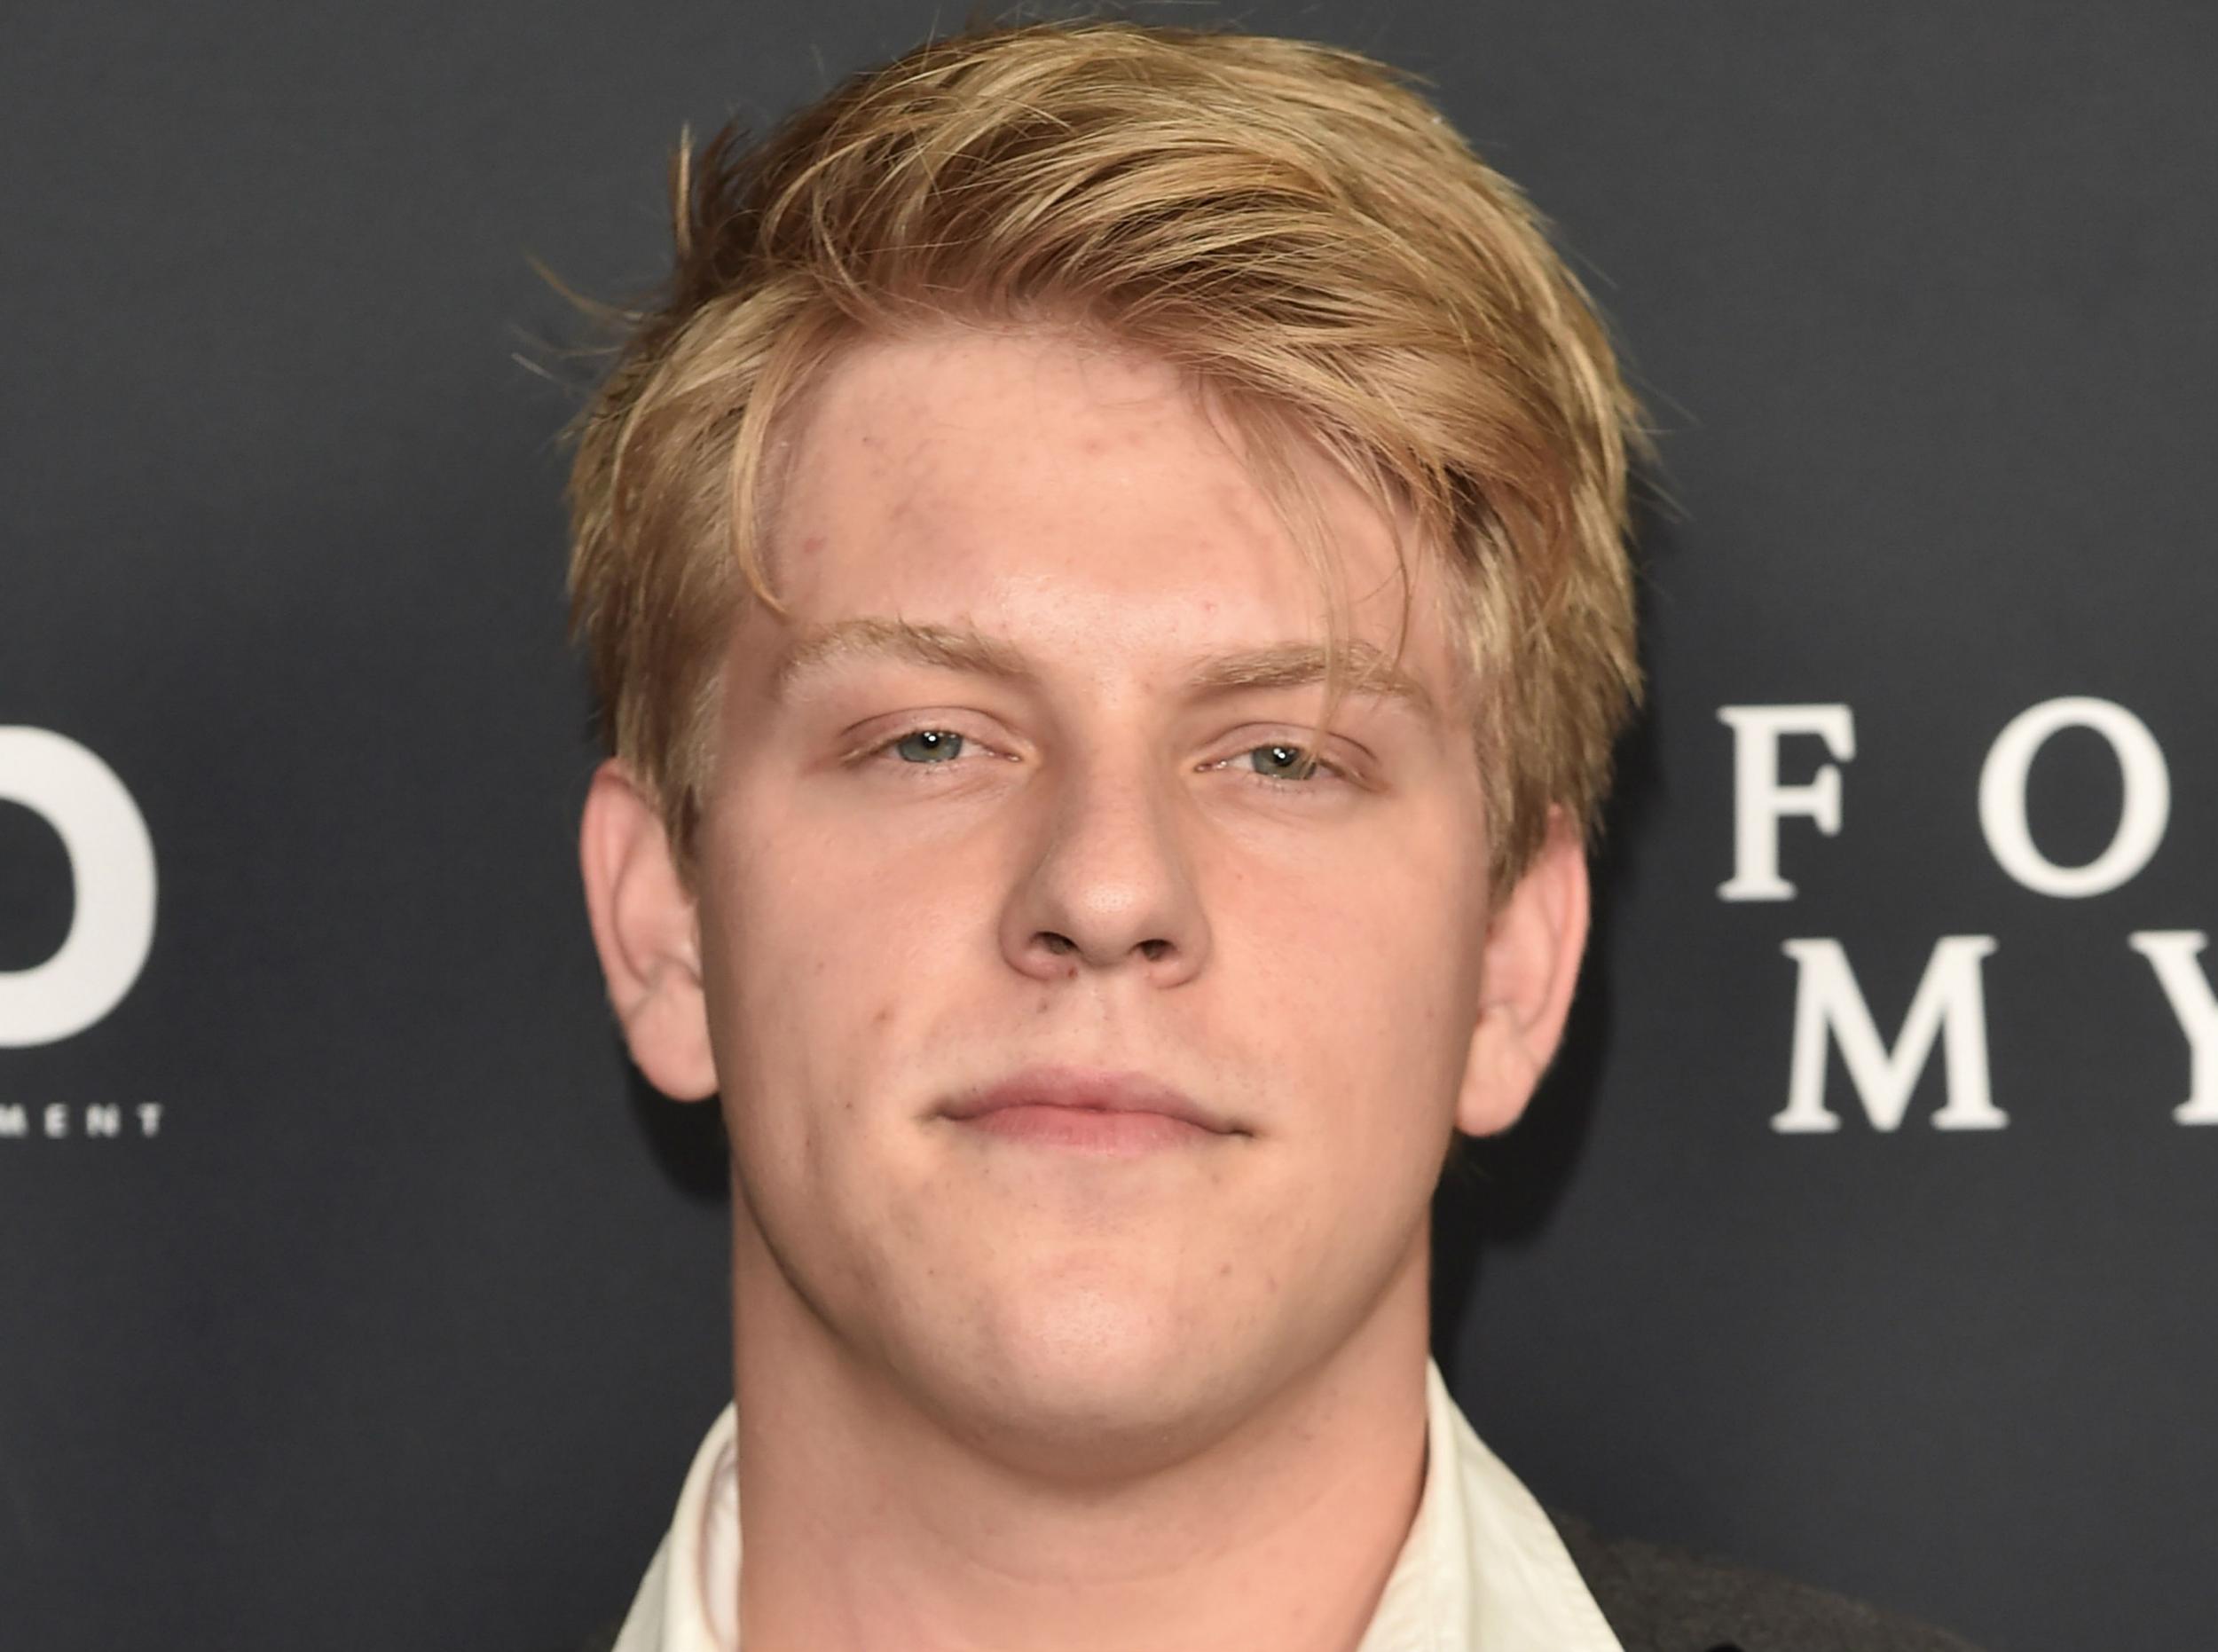 “Modern Family” actor Jackson Odell died from a drug overdose